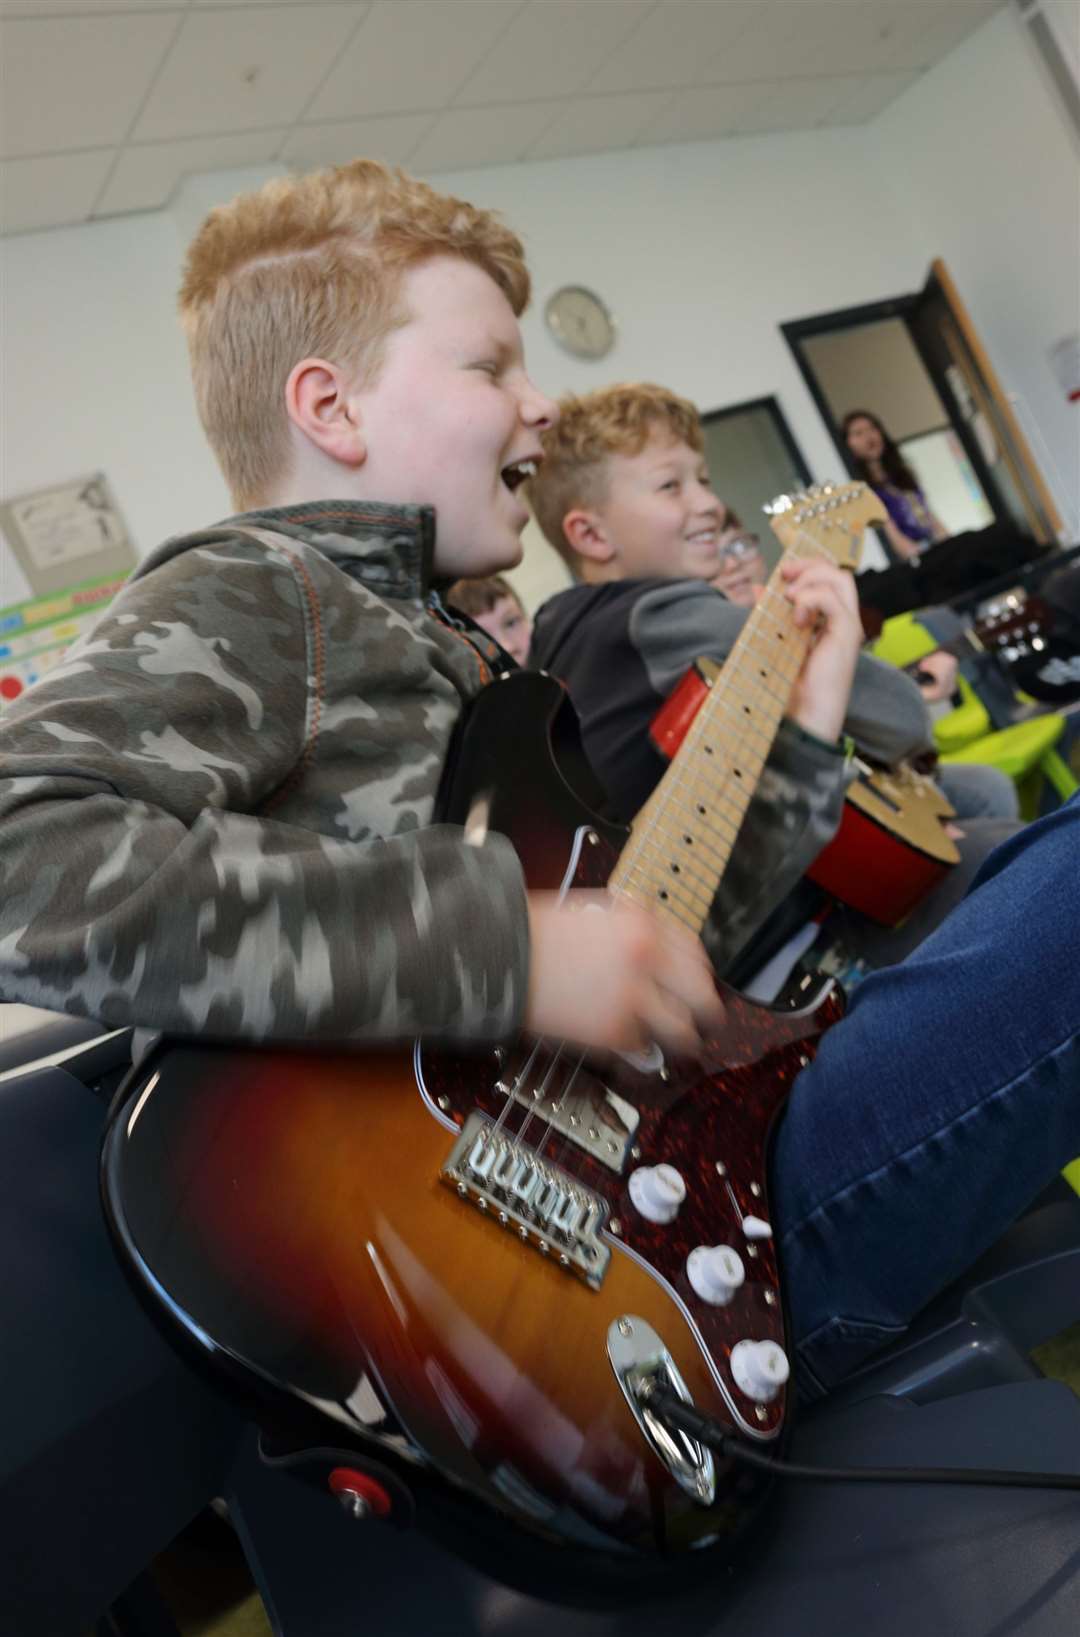 Rocking it out in the guitar lessons.